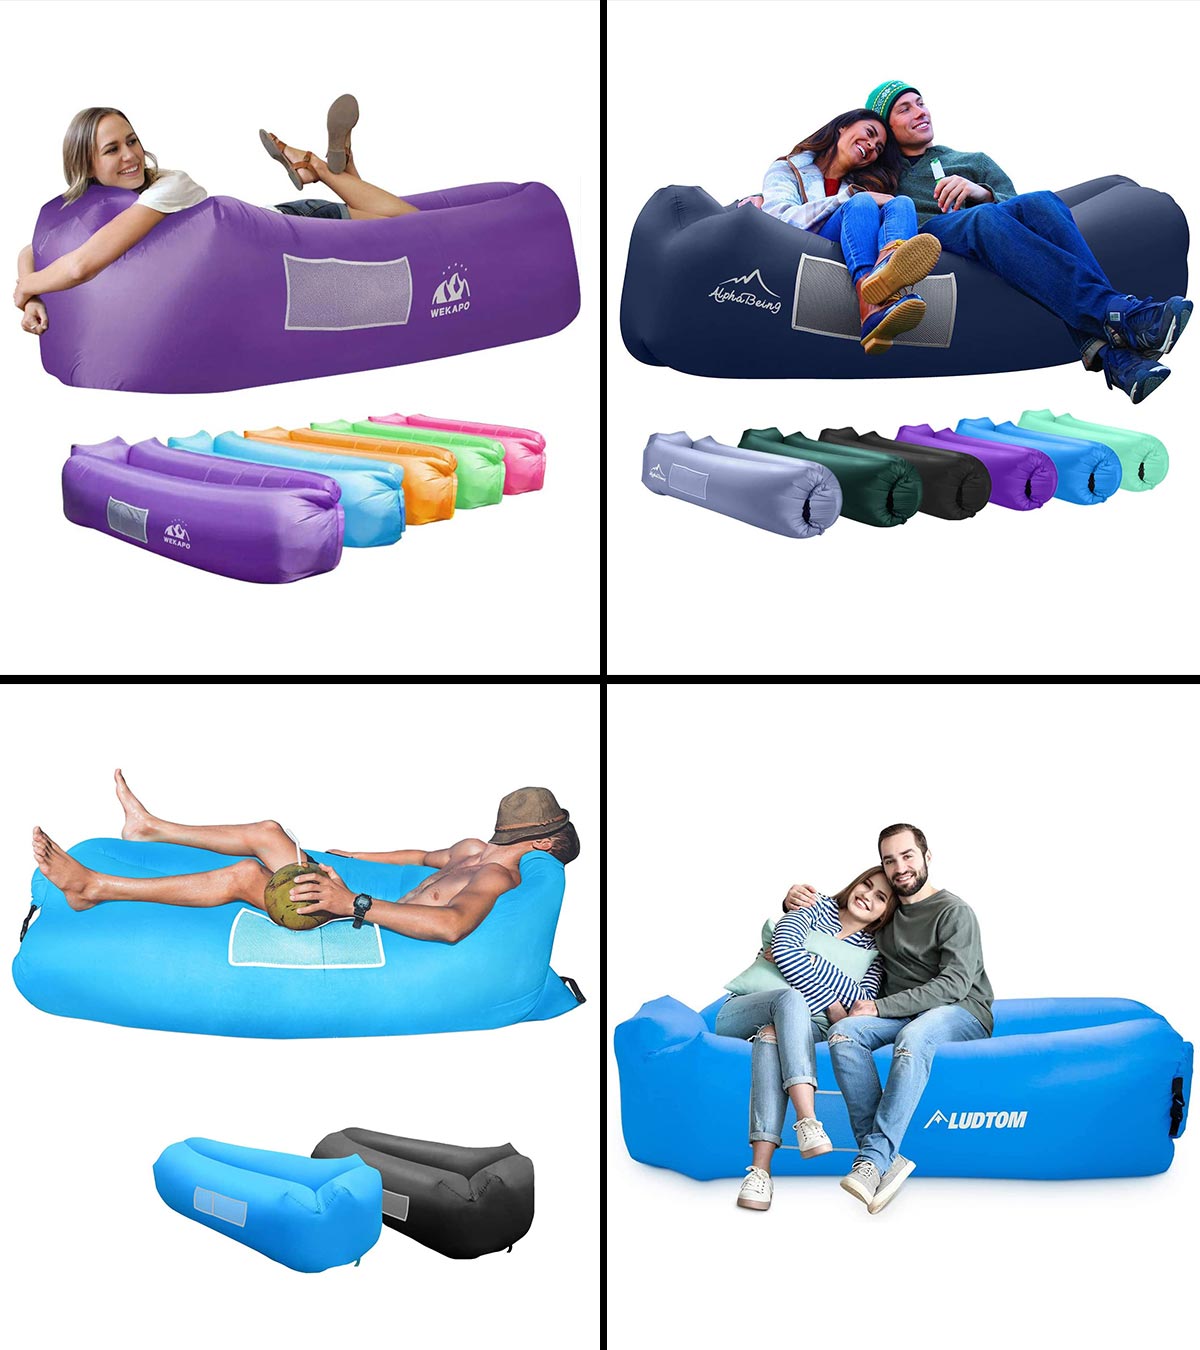 1 Pack Poecent Inflatable Lounger,Water Proof& Anti-Air Leaking Design-Ideal Couch for Backyard Lakeside Beach Traveling Camping Picnics & Music Festivals 